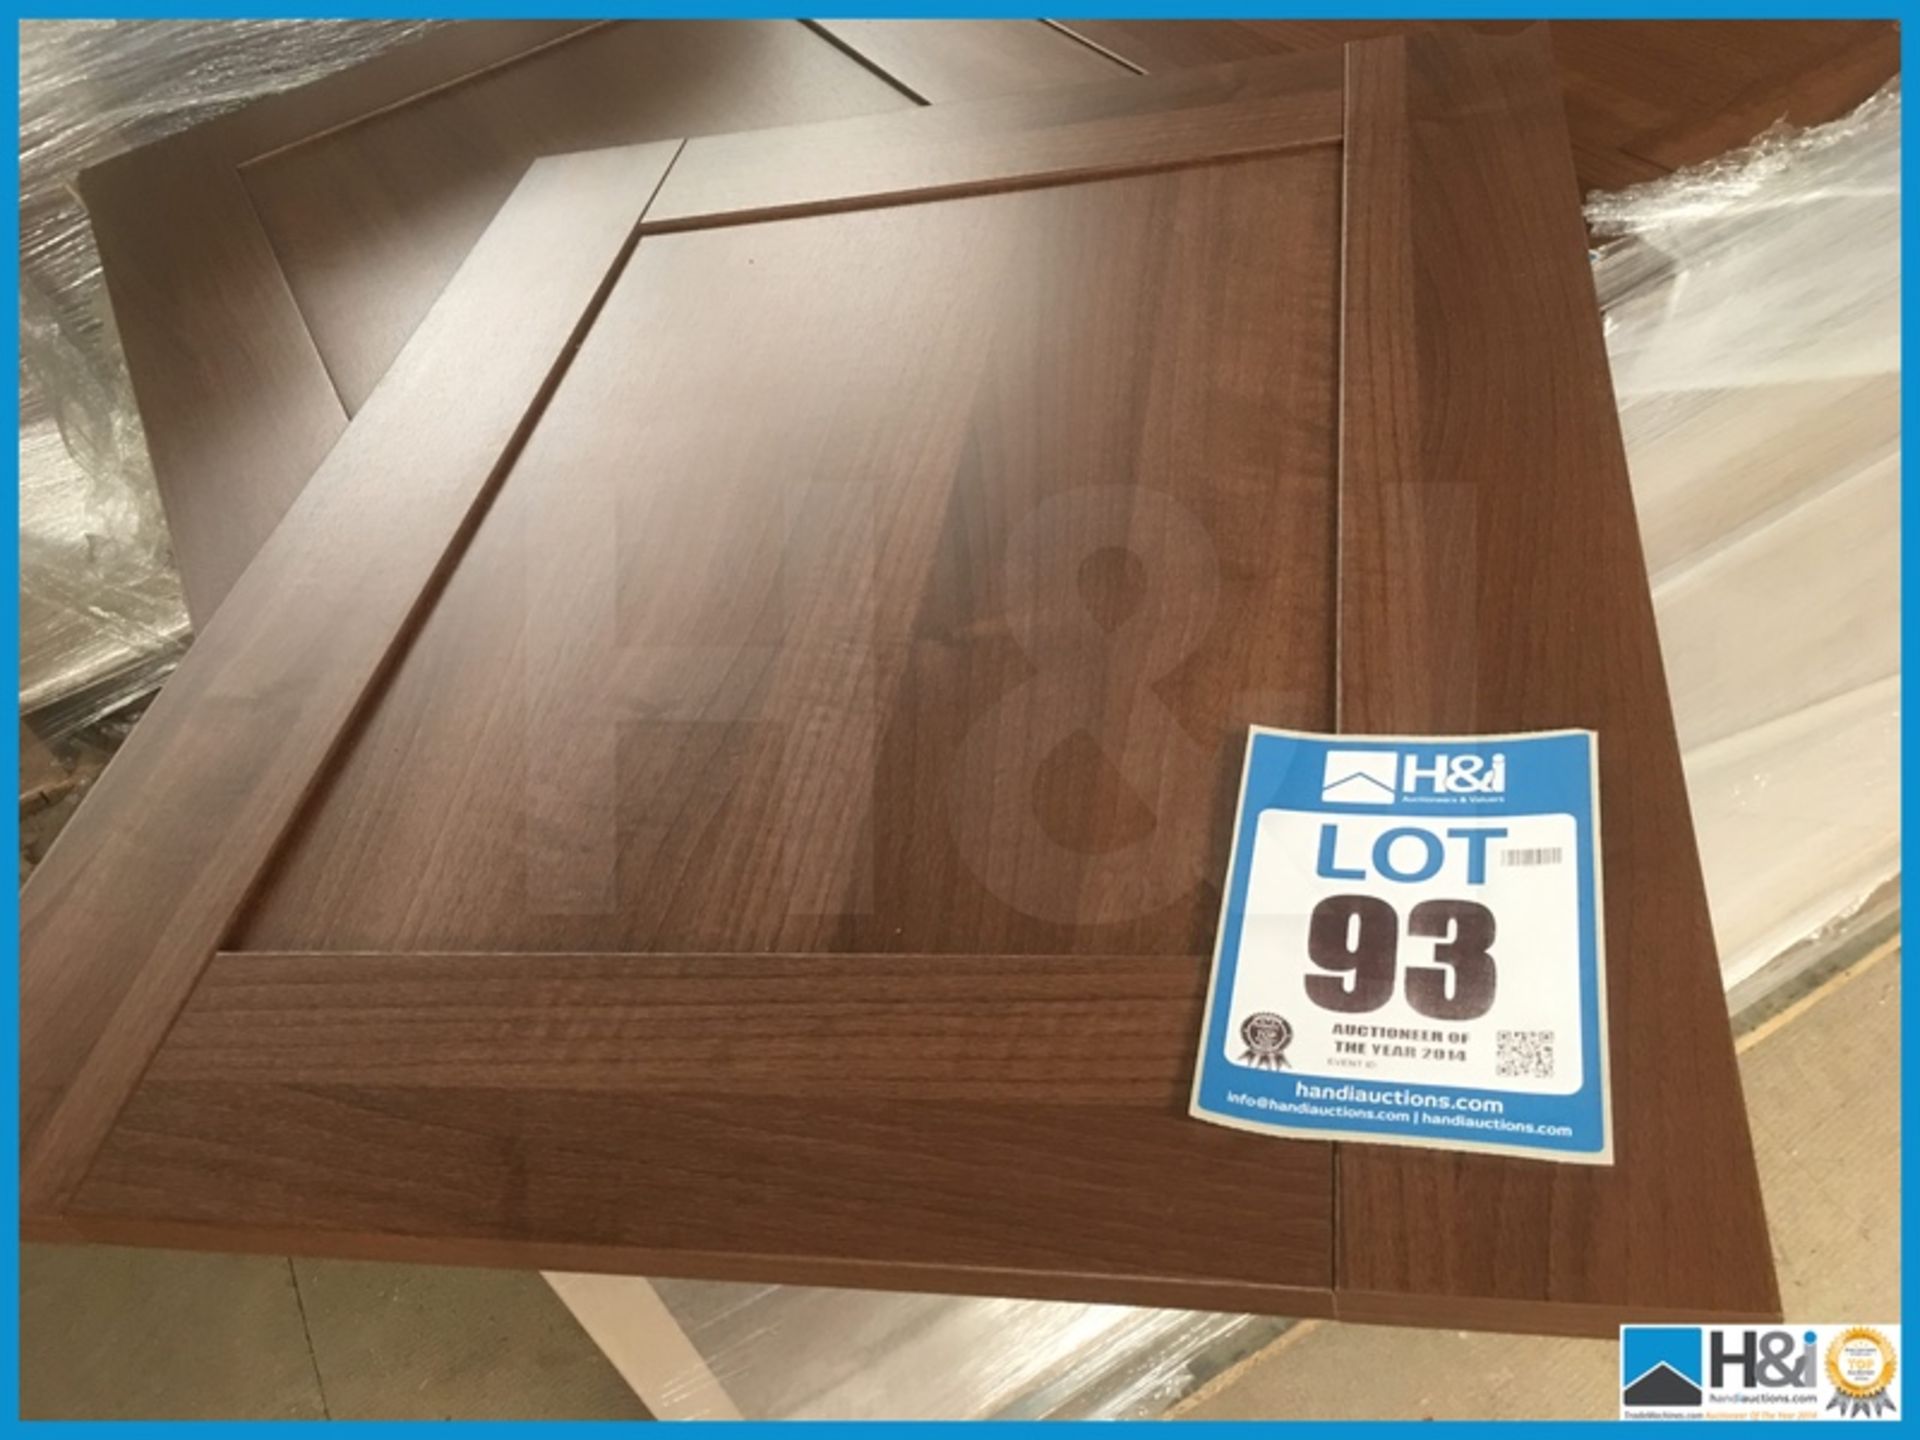 Approx x 90 715mm X 915 mm American walnut contemporary kitchen door with retail value of lot £4050.